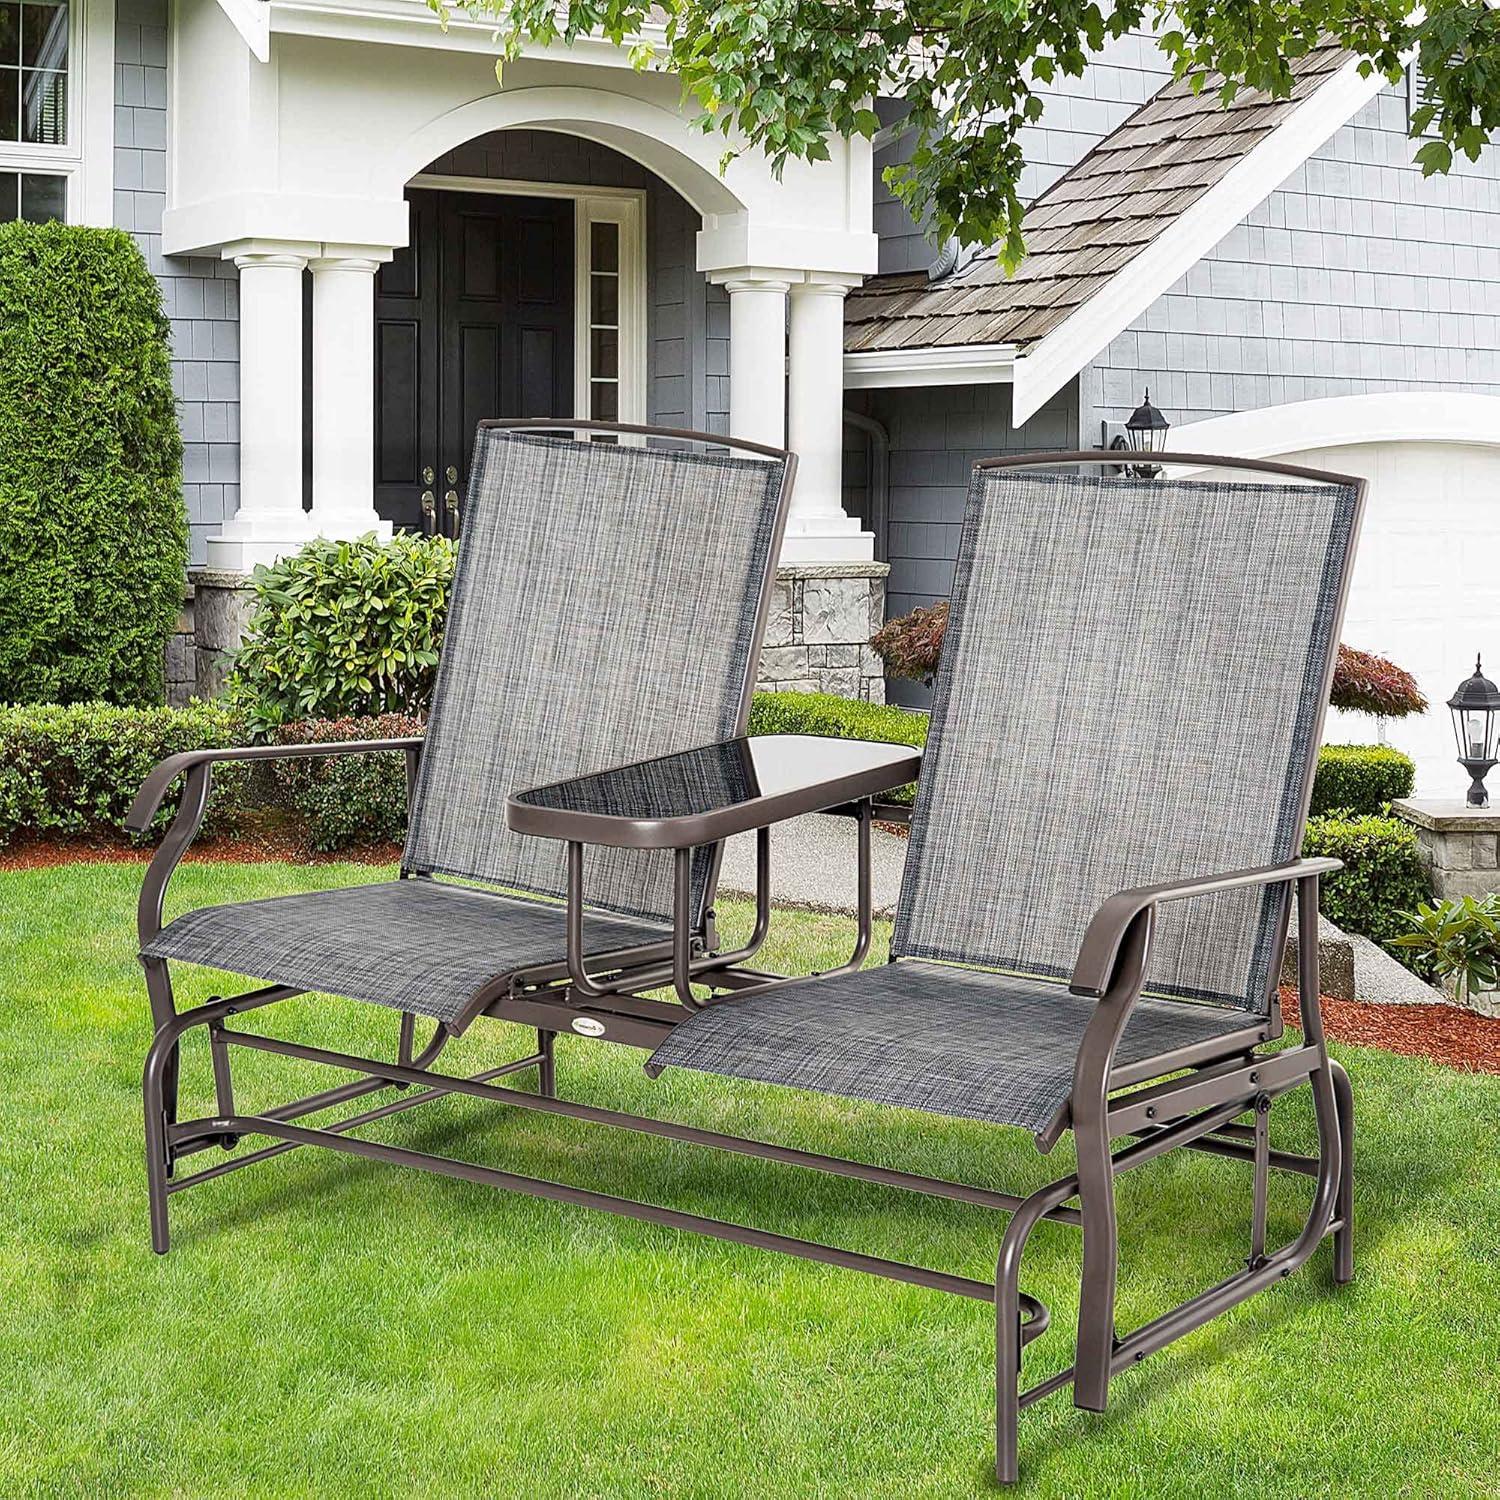 Twin Comfort Outdoor Glider Bench with Center Table, Brown and Gray